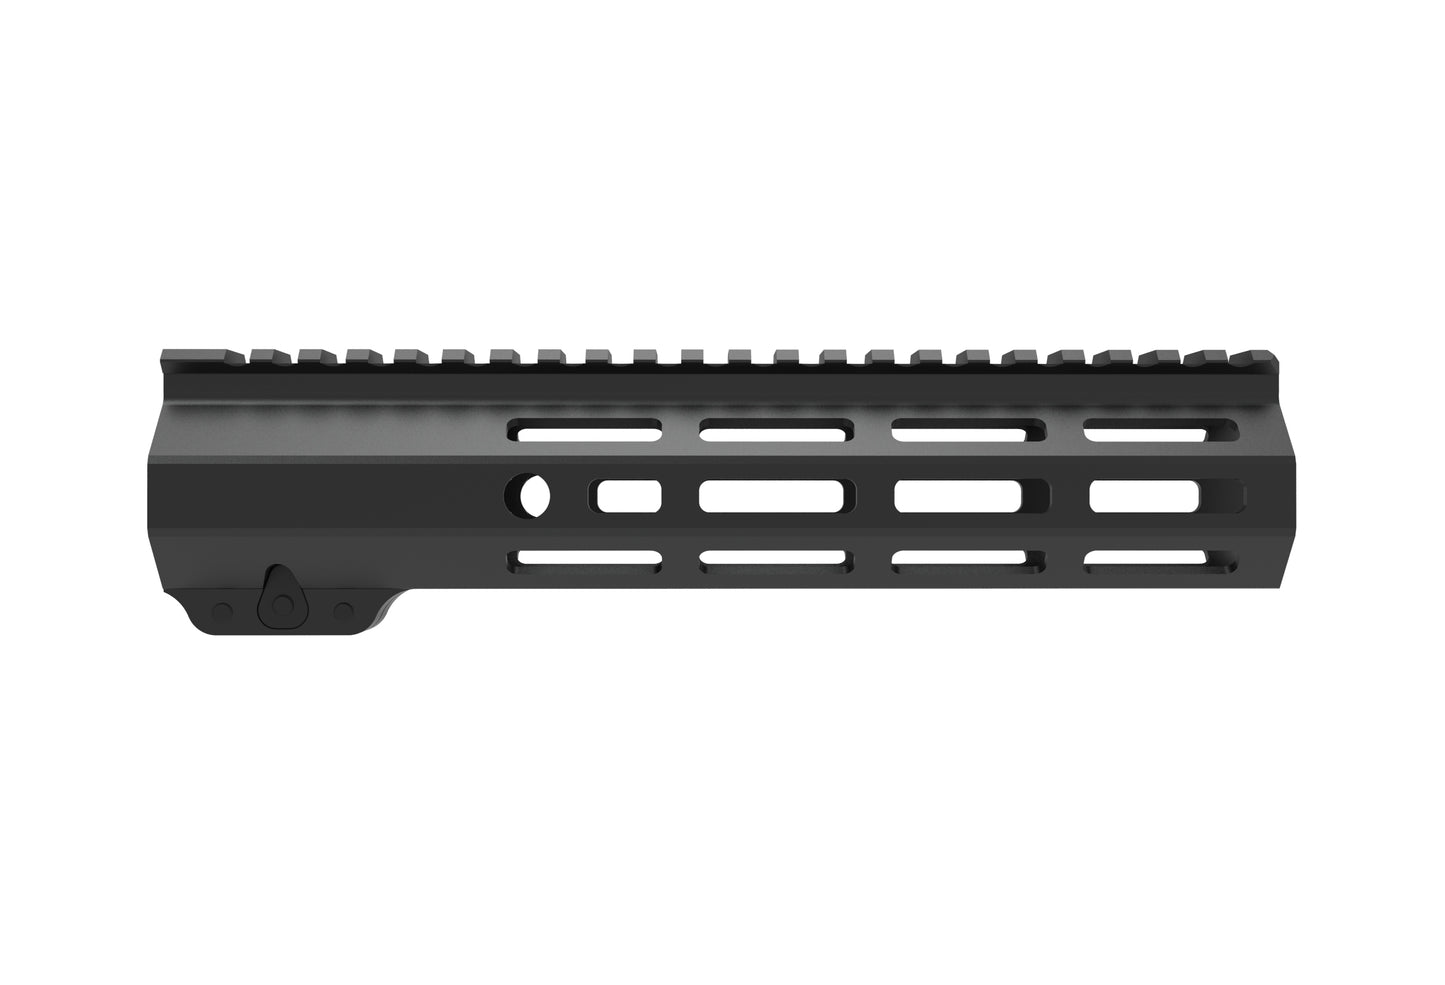 Gen 2 OEM Rail with A.S.A.L. and QD mounts